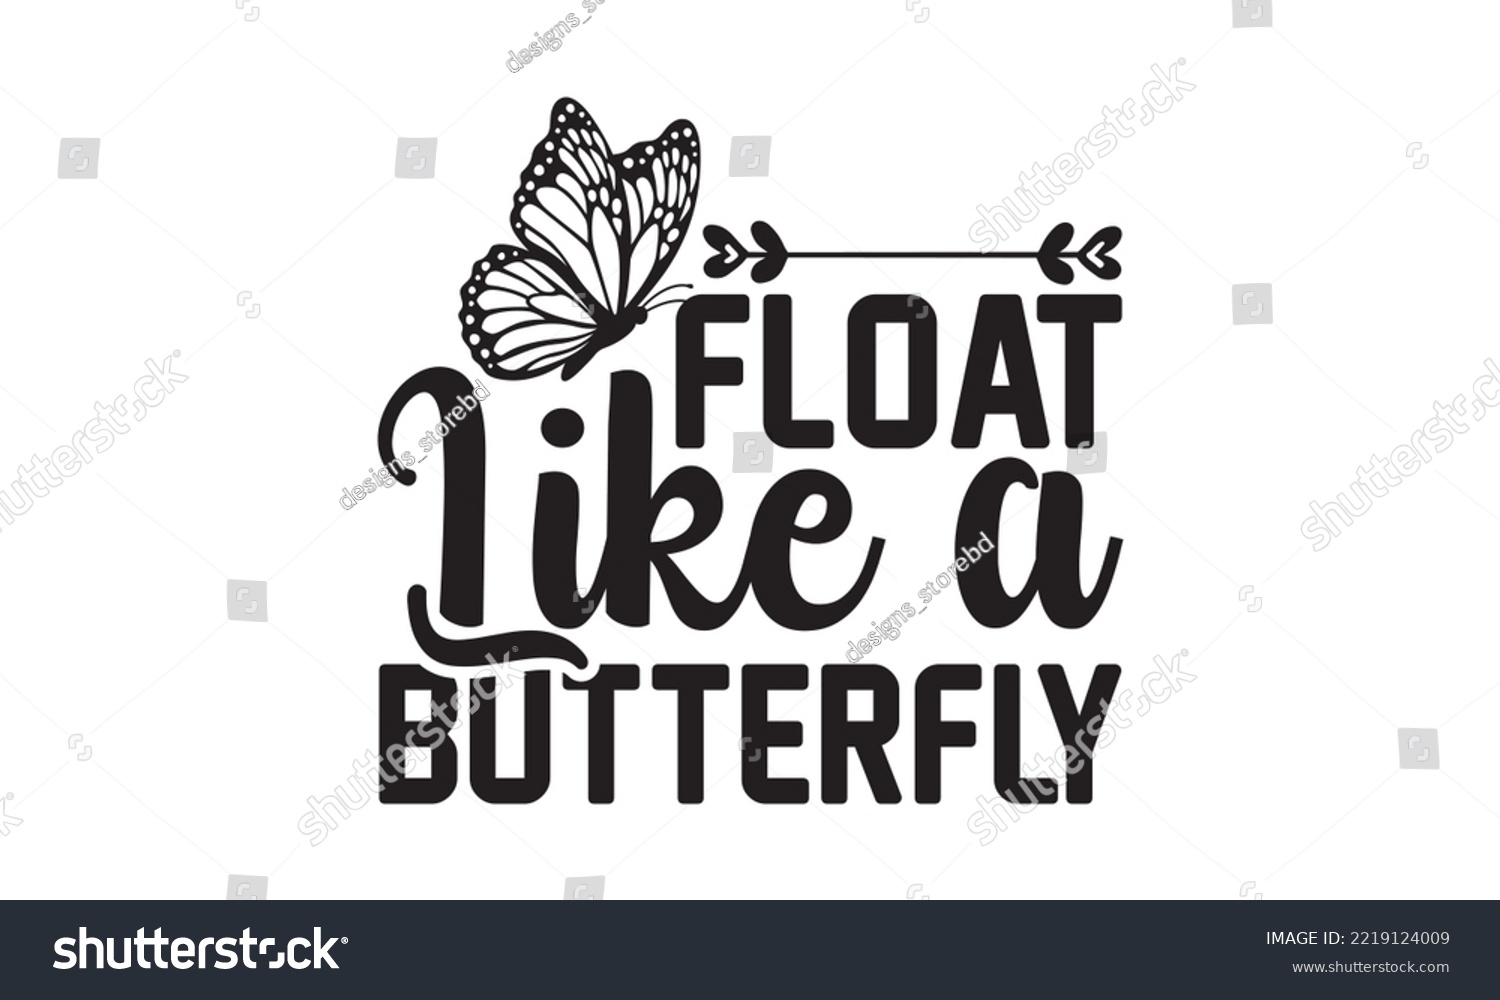 SVG of Float Like a Butterfly Svg, Butterfly svg, Butterfly svg t-shirt design, butterflies and daisies positive quote flower watercolor margarita mariposa stationery, mug, t shirt, svg, eps 10 svg